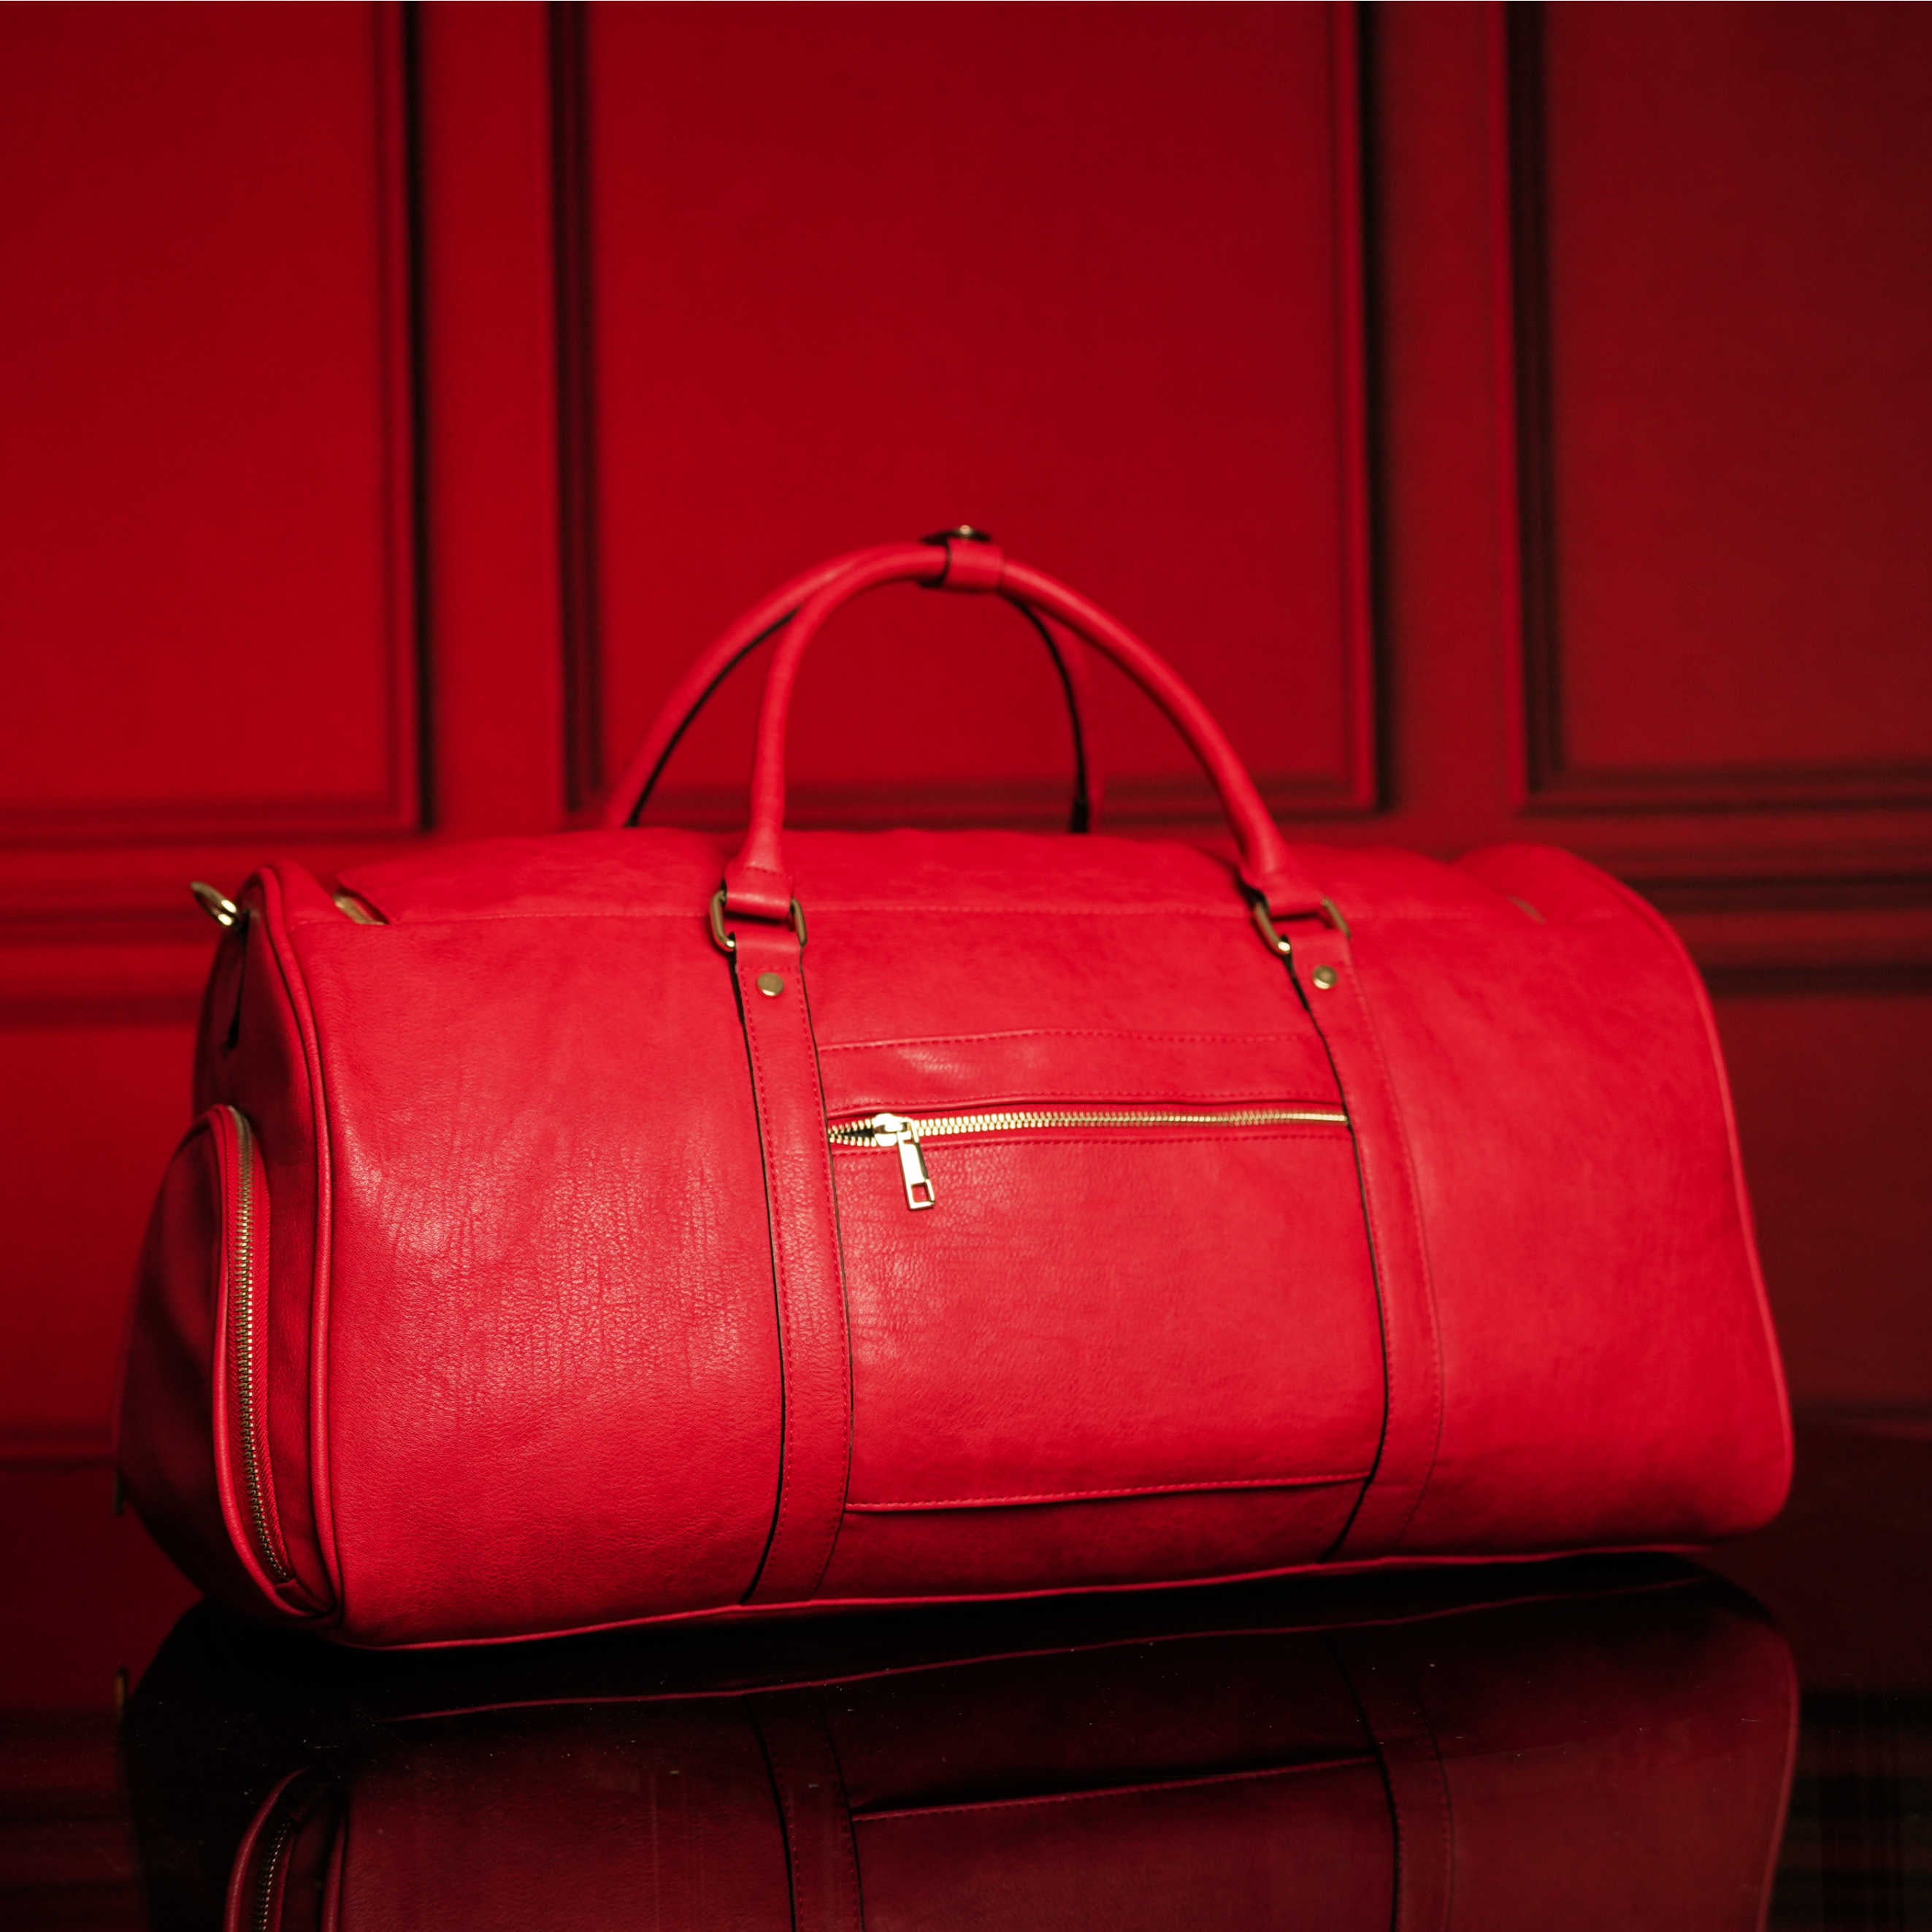 Red Tumbled Leather Duffle Bag (New Weekender Design) - Sole Premise